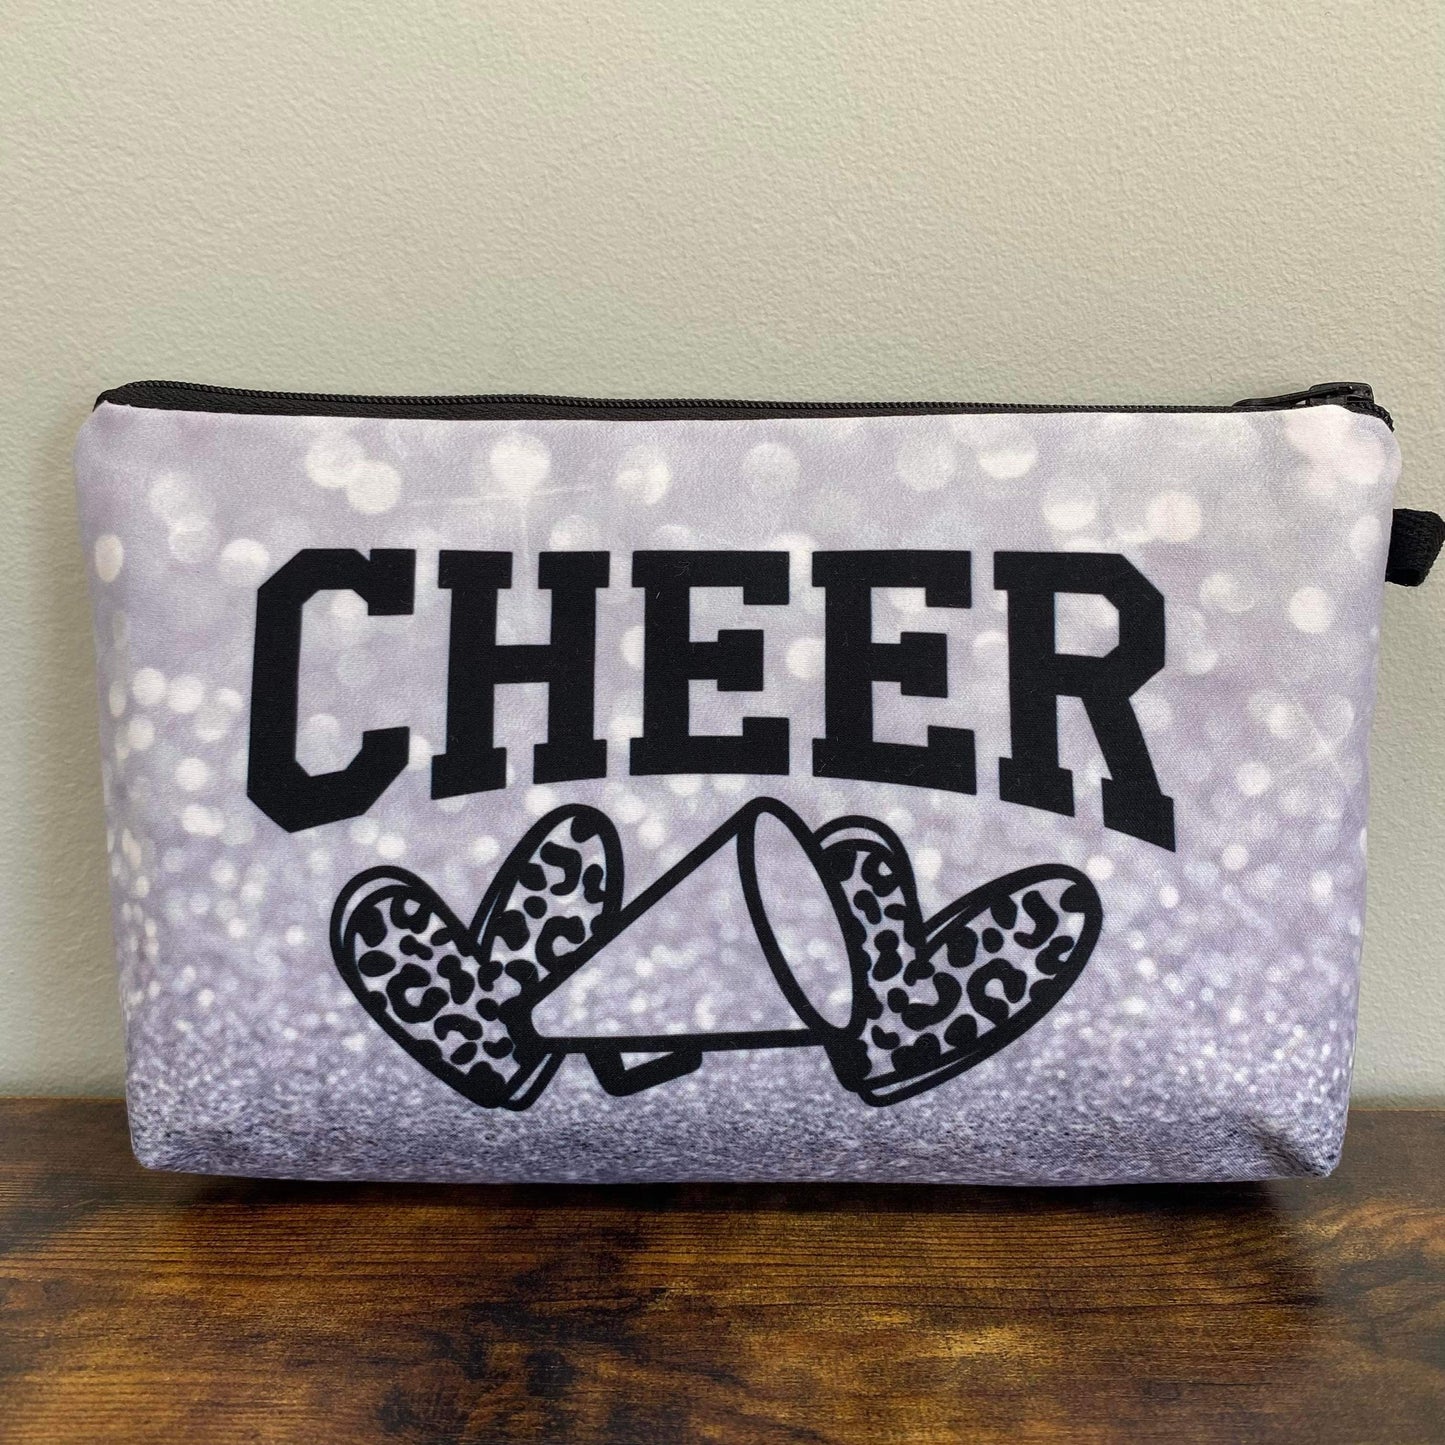 Pouch - Cheer